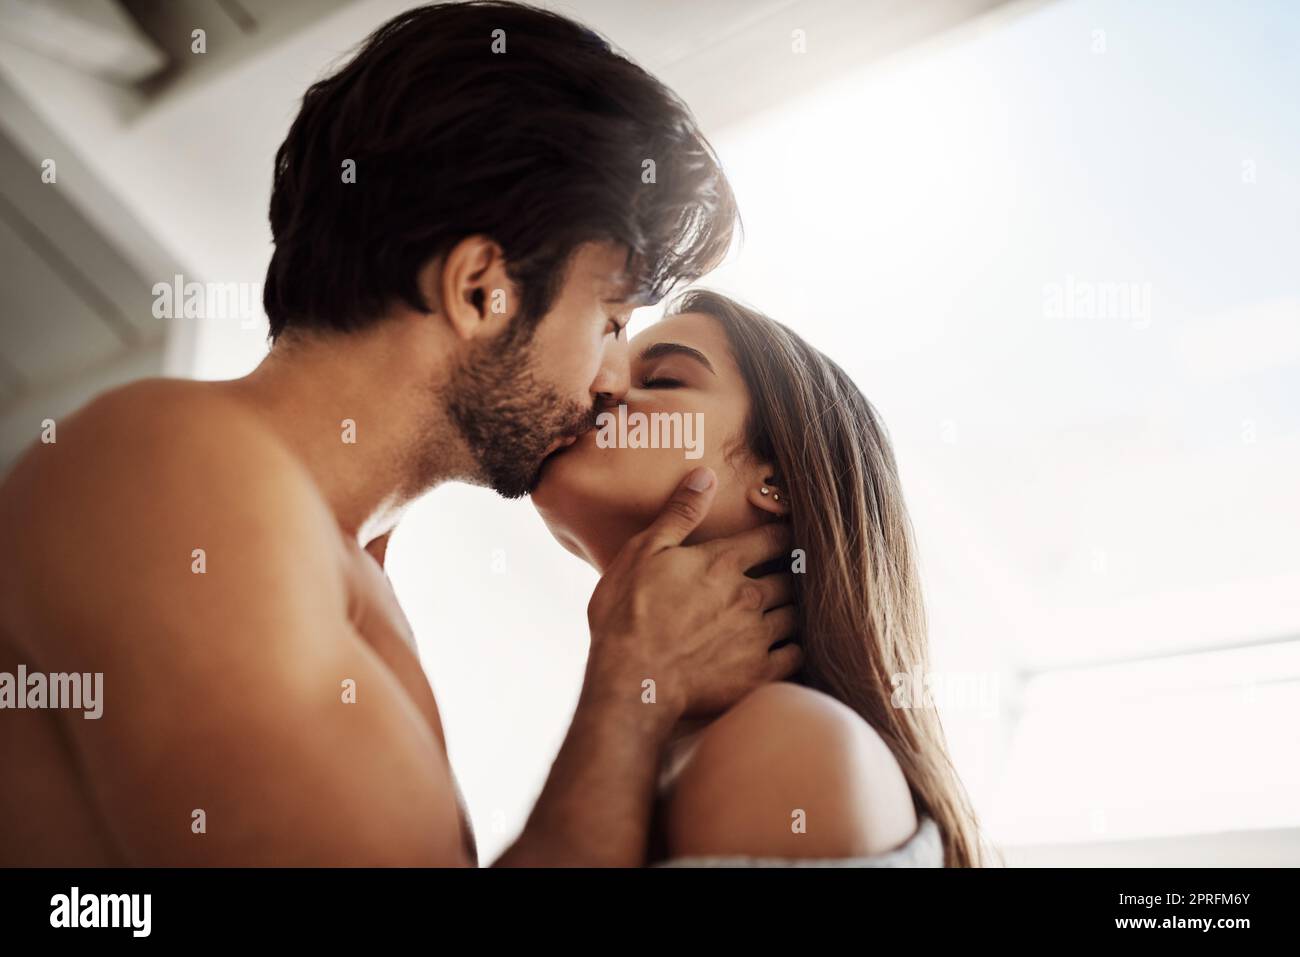 Your kisses make me weak. an affectionate young couple in their bedroom at home. Stock Photo